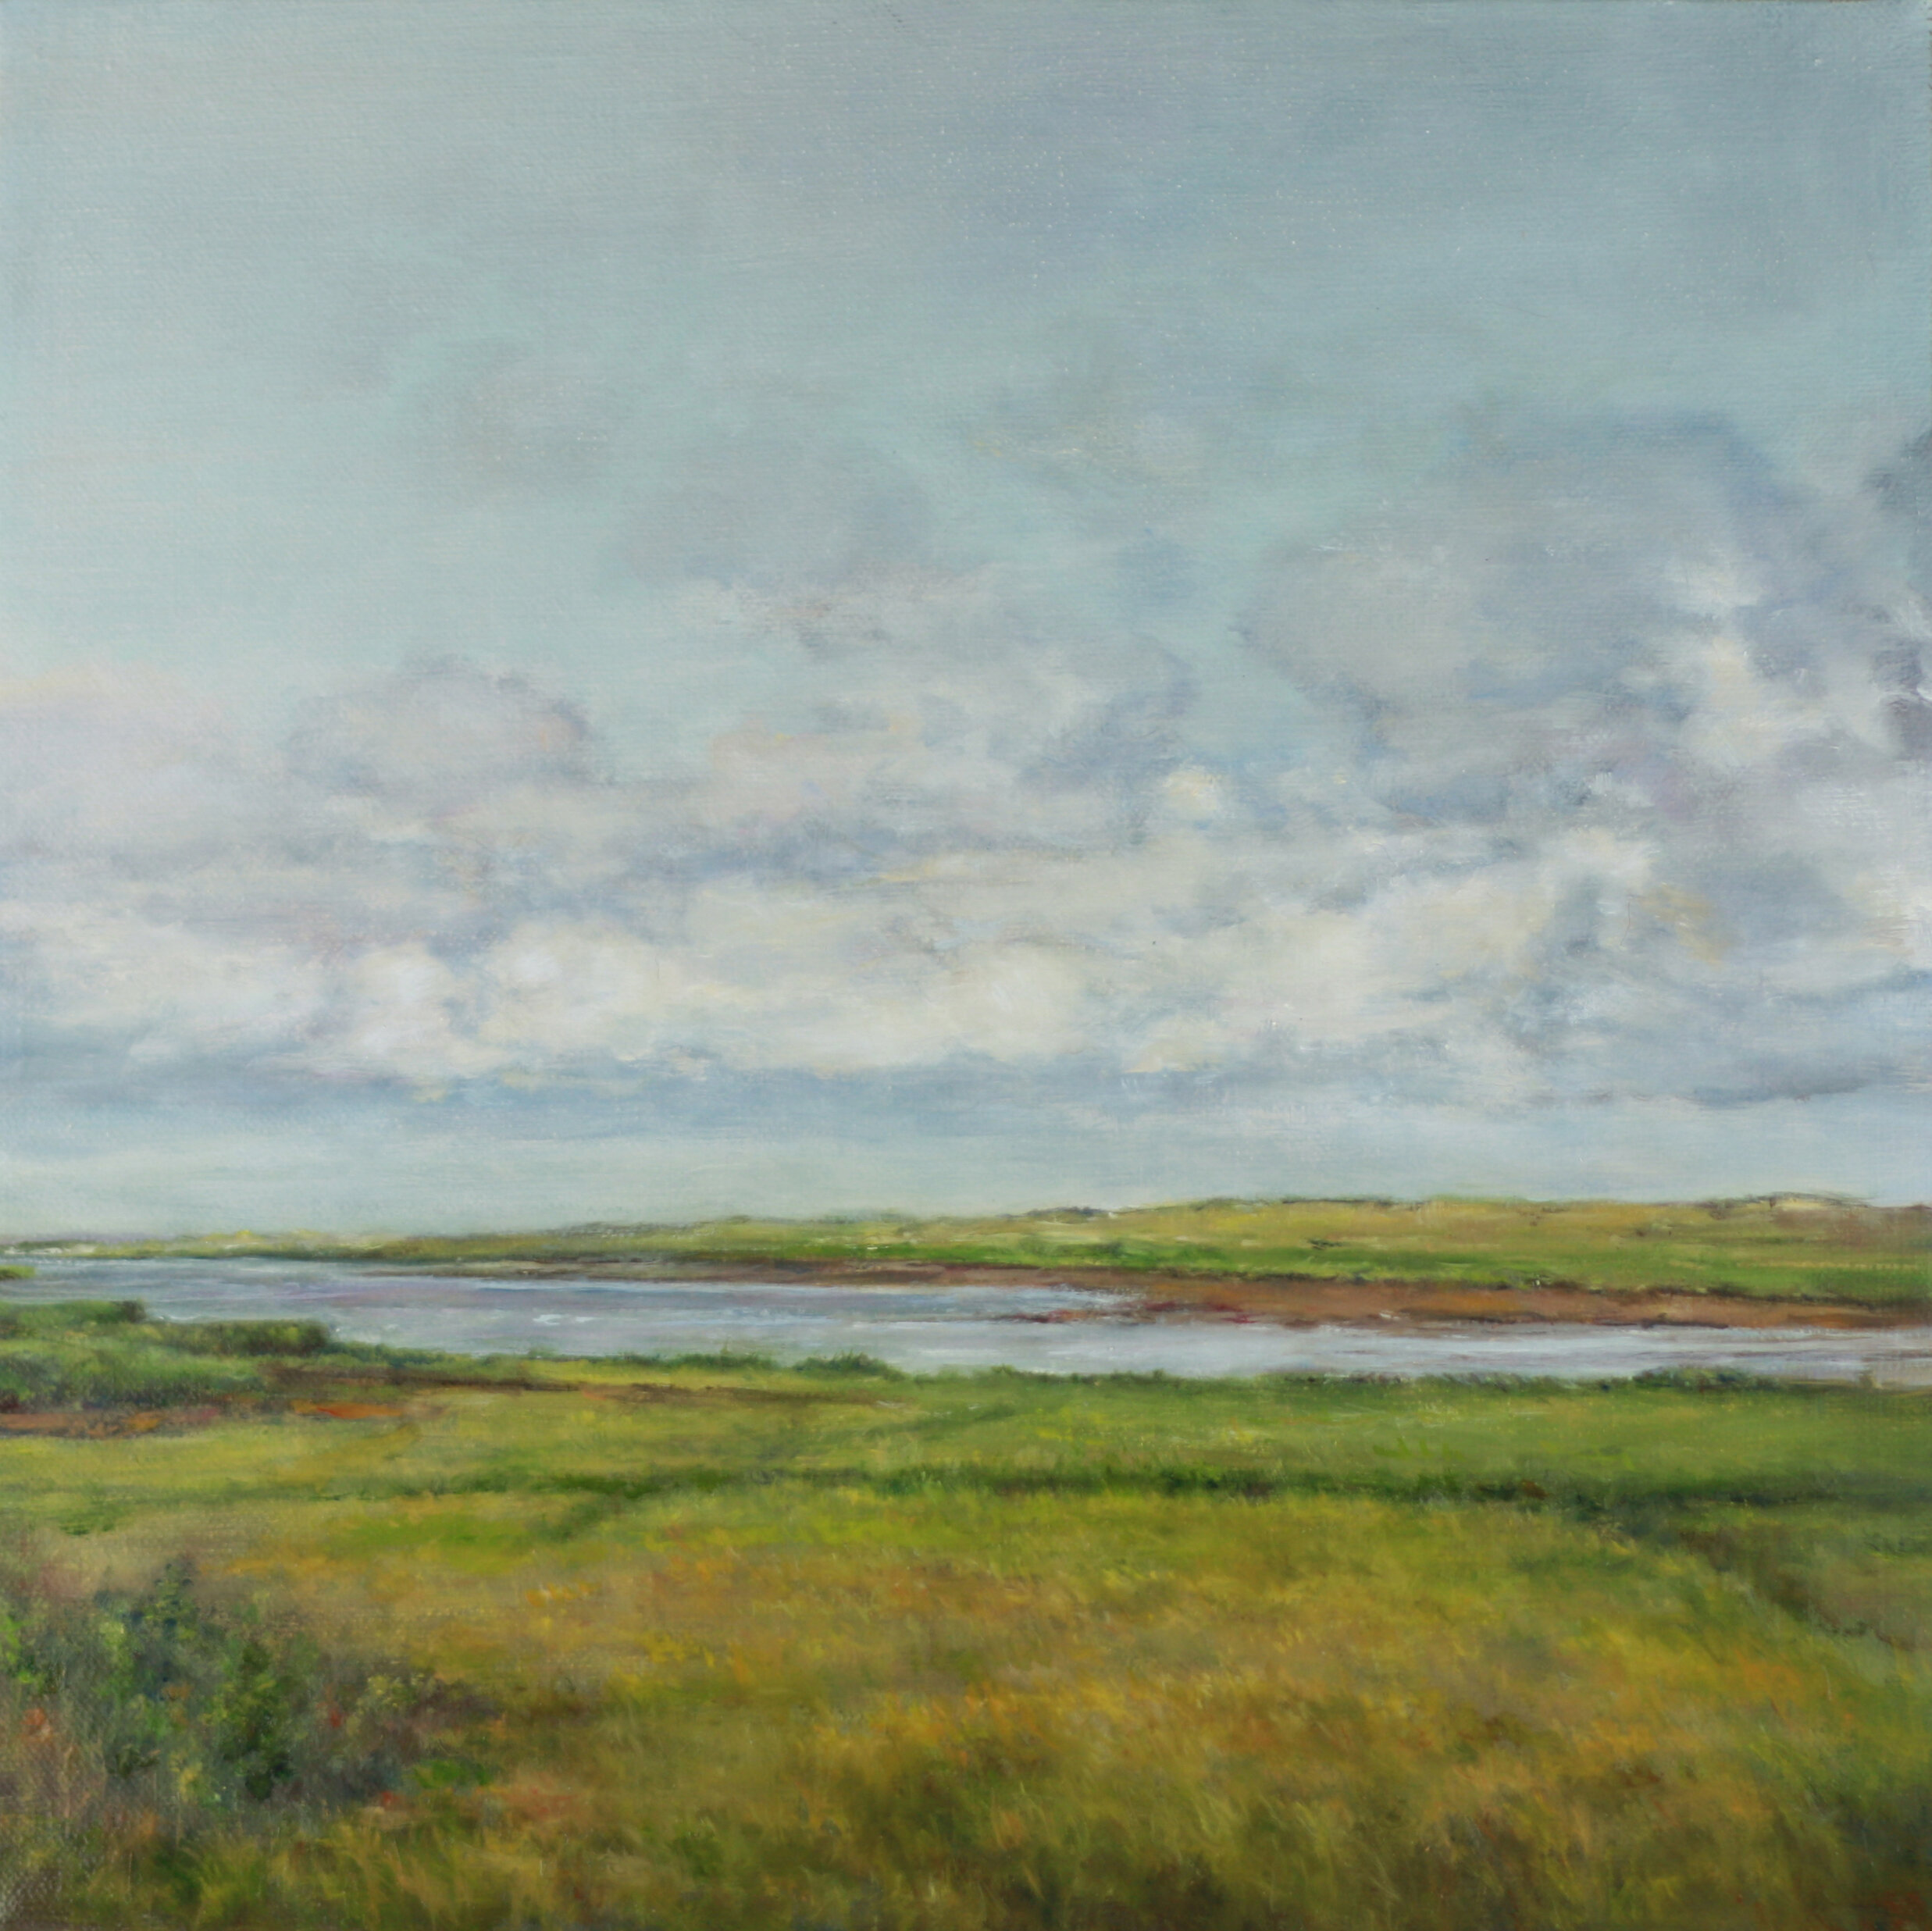  Mary Lou Schempf  Barn Island Meadow,  12” x 12”, oil on canvas  (private collection)  